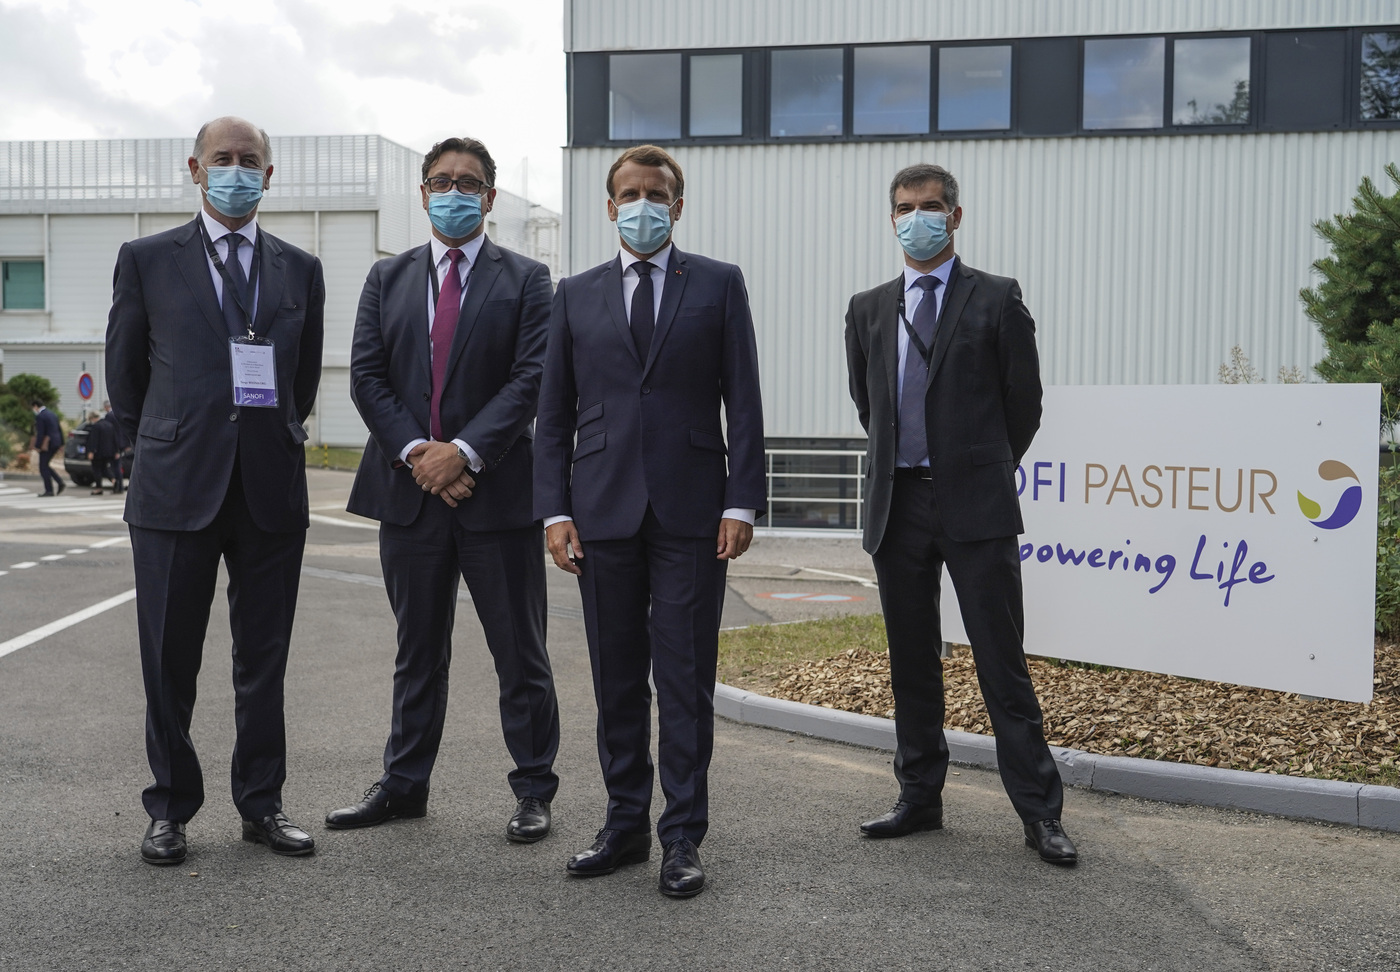 From left to right, Board Director of Sanofi Serge Weinberg, CEO of Sanofi Paul Hudson, French President Emmanuel Macron and President of Sanofi France Olivier Bogillot pose for a group photo at the French drugmaker's vaccine unit Sanofi Pasteur plant in Marcy-l'Etoile, near Lyon, central France, Tuesday, June 16, 2020.The visit comes after rival pharmaceutical company AstraZeneca this weekend announced a deal to supply 400 million vaccine doses to EU countries, including France. (AP Photo/Laurent Cipriani, Pool)